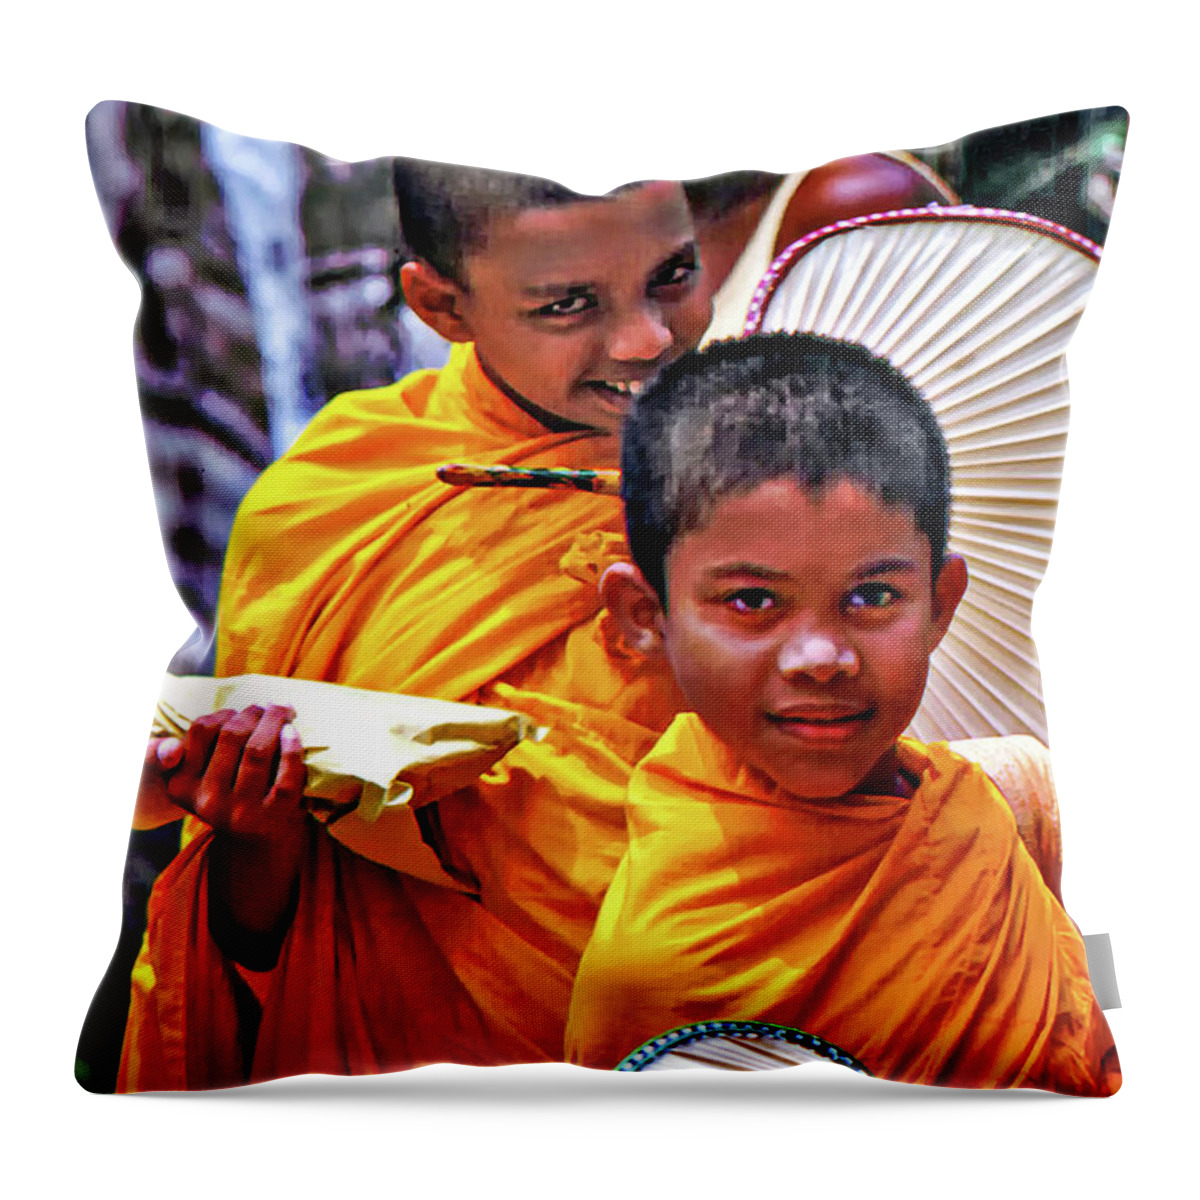 Buddhism Throw Pillow featuring the photograph Young Monks by Steve Harrington